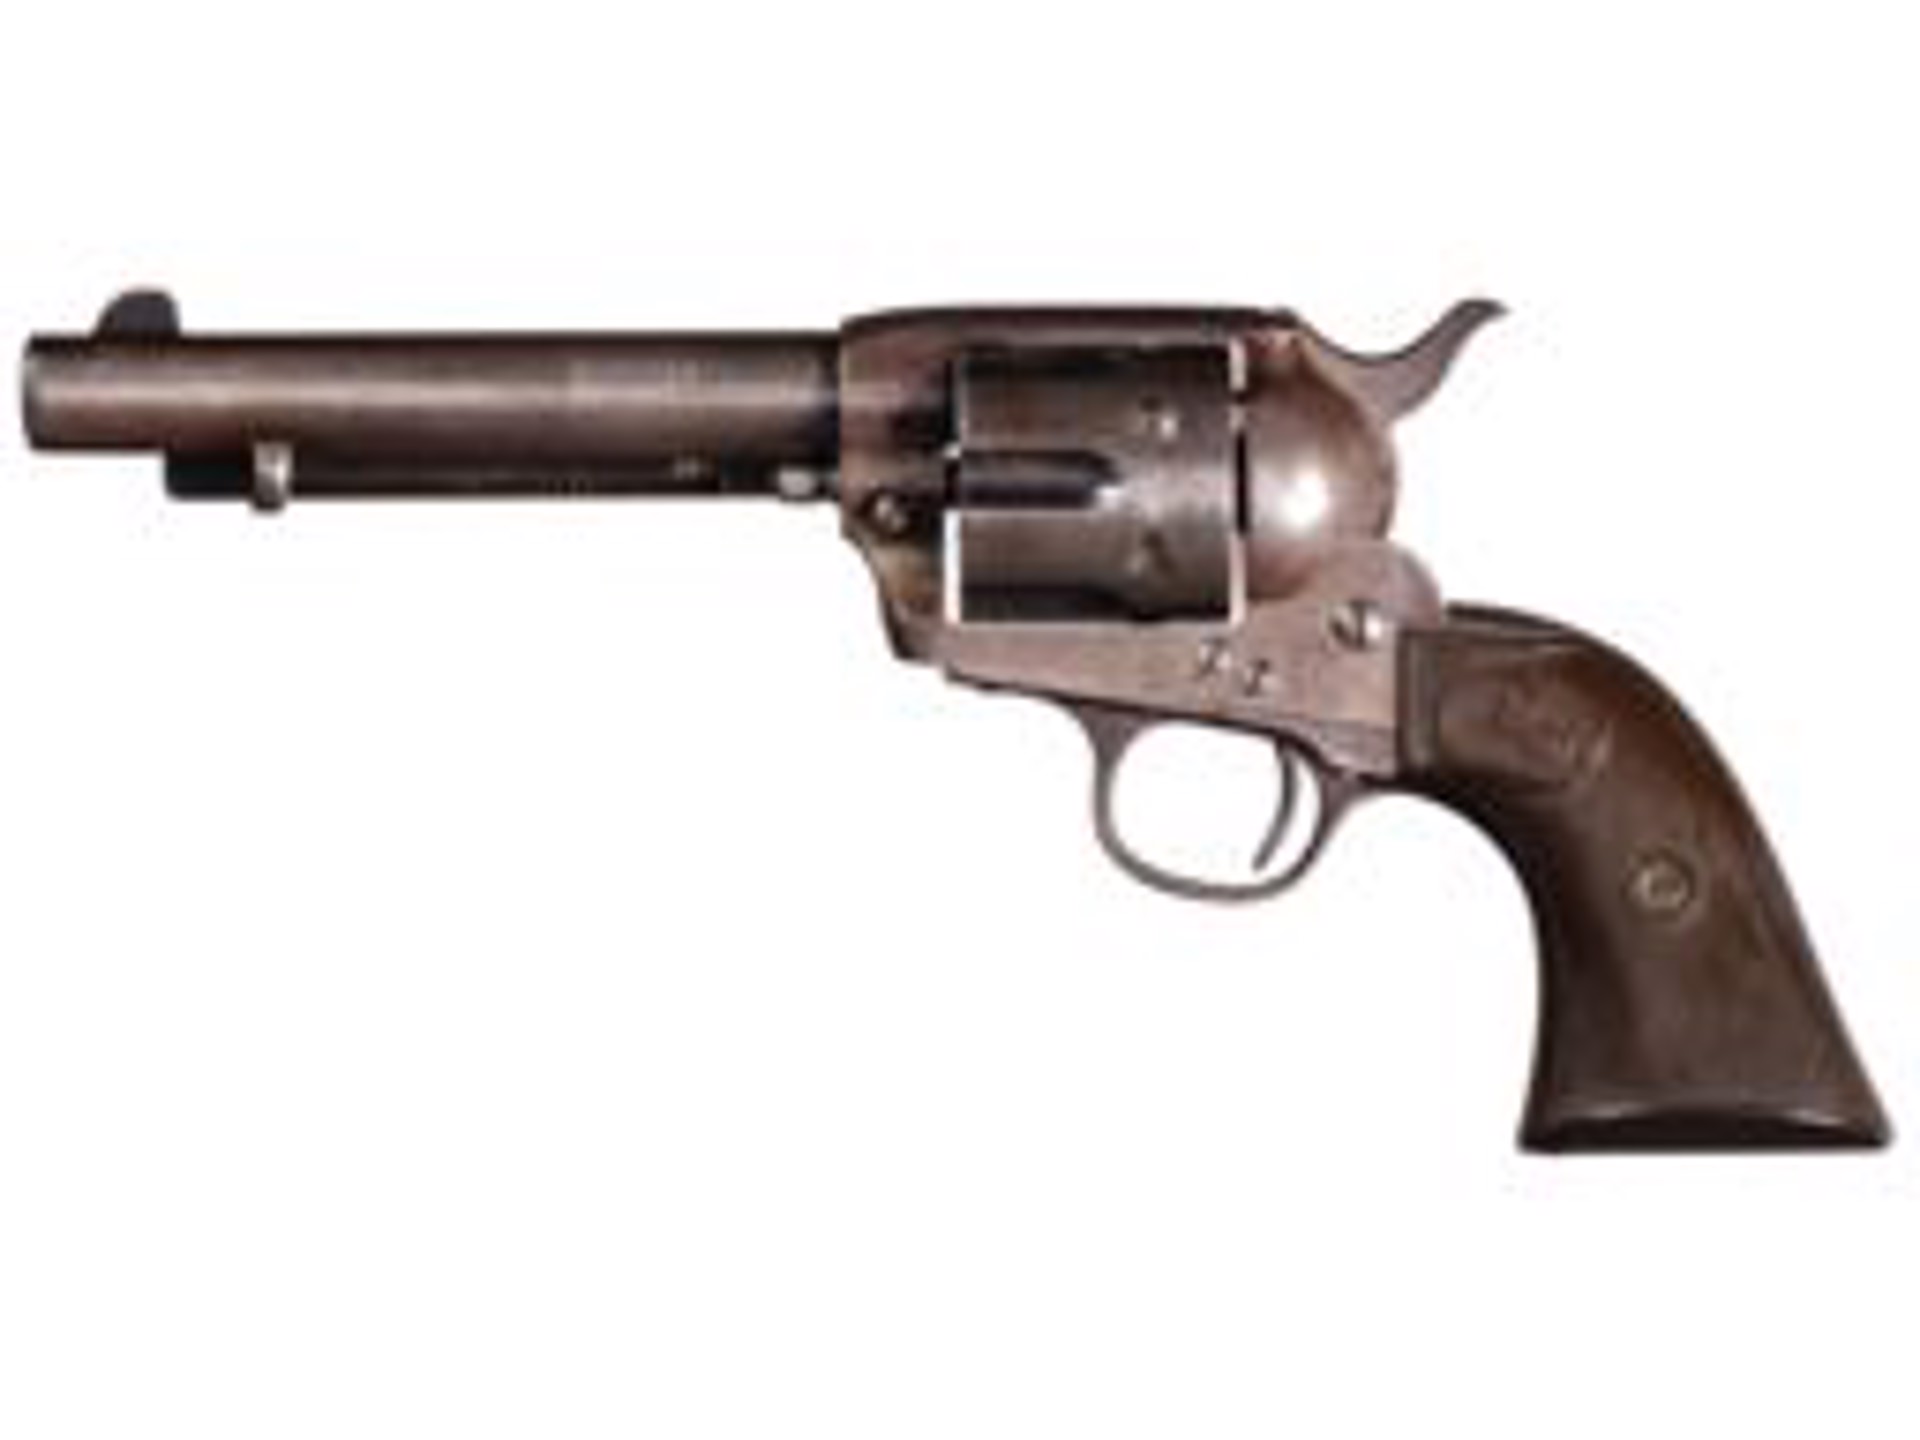 Single Action Army Revolver by Colt